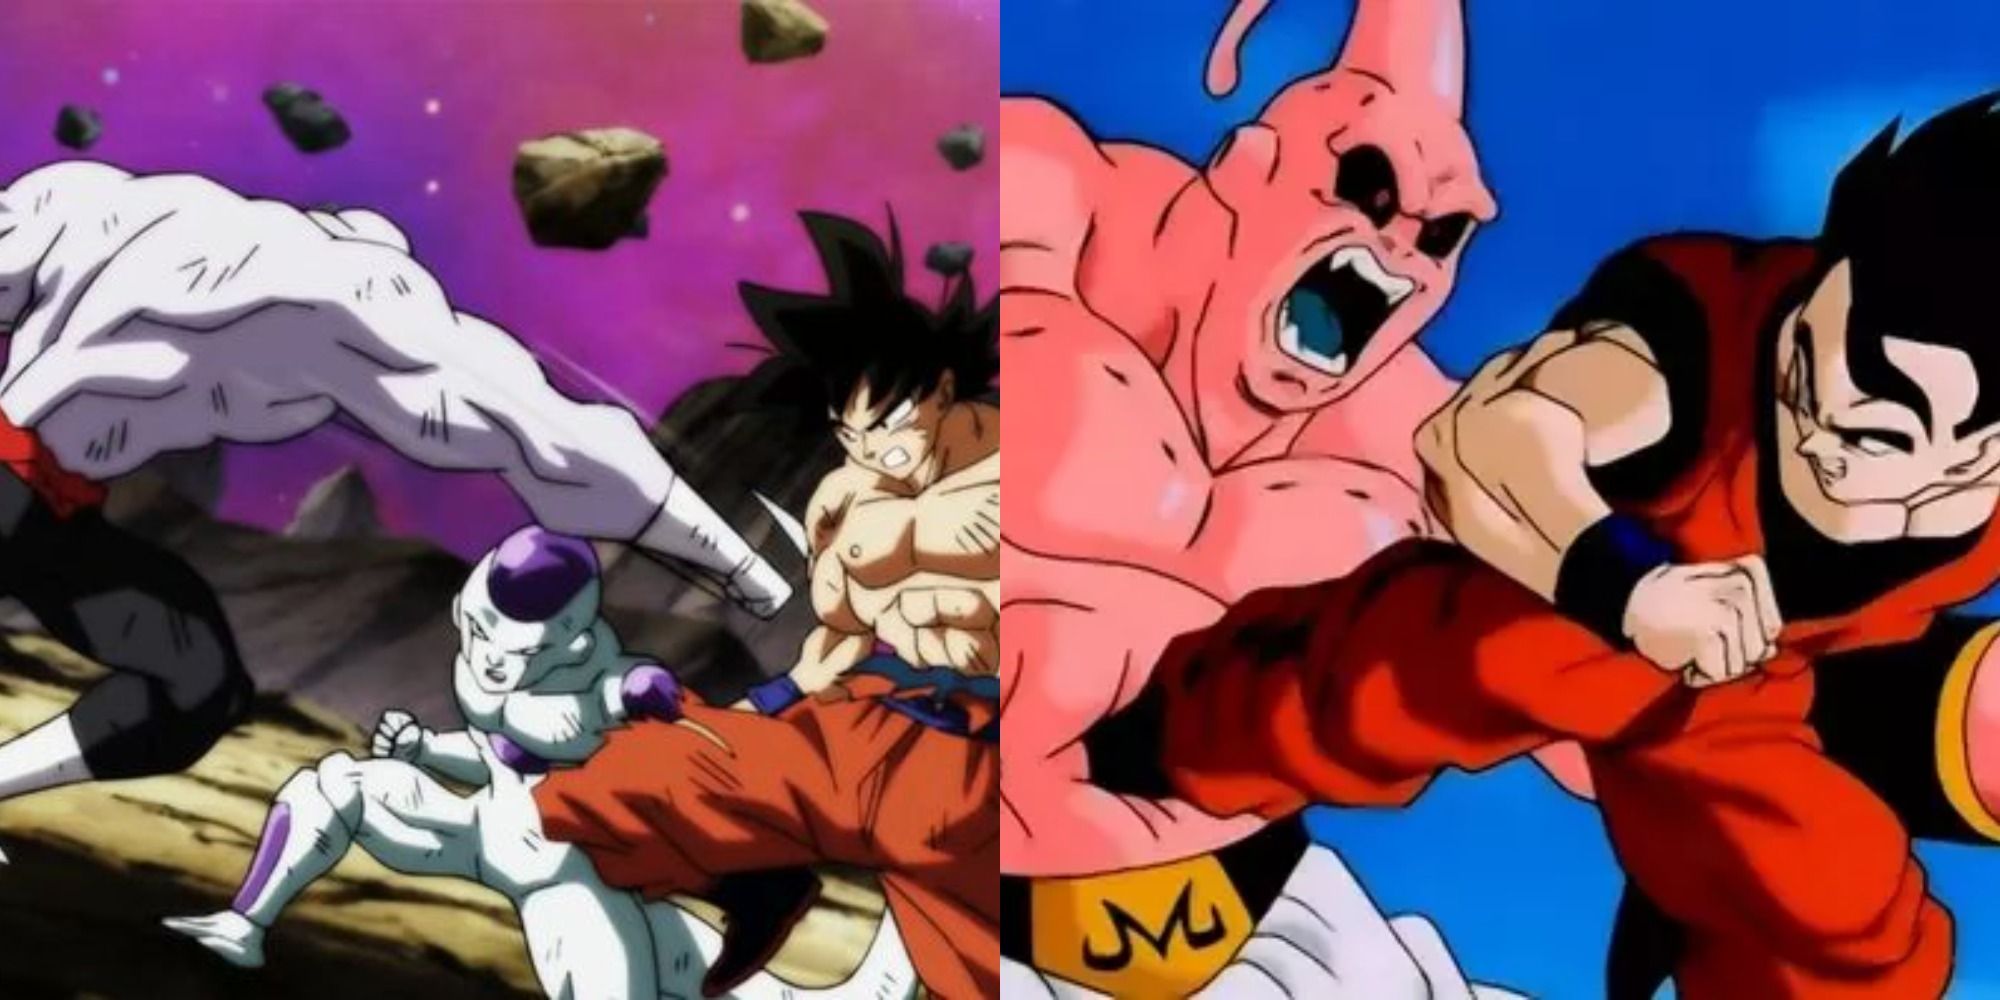 10 Dragon Ball Scenes Viewers Love To Rewatch Over And Over